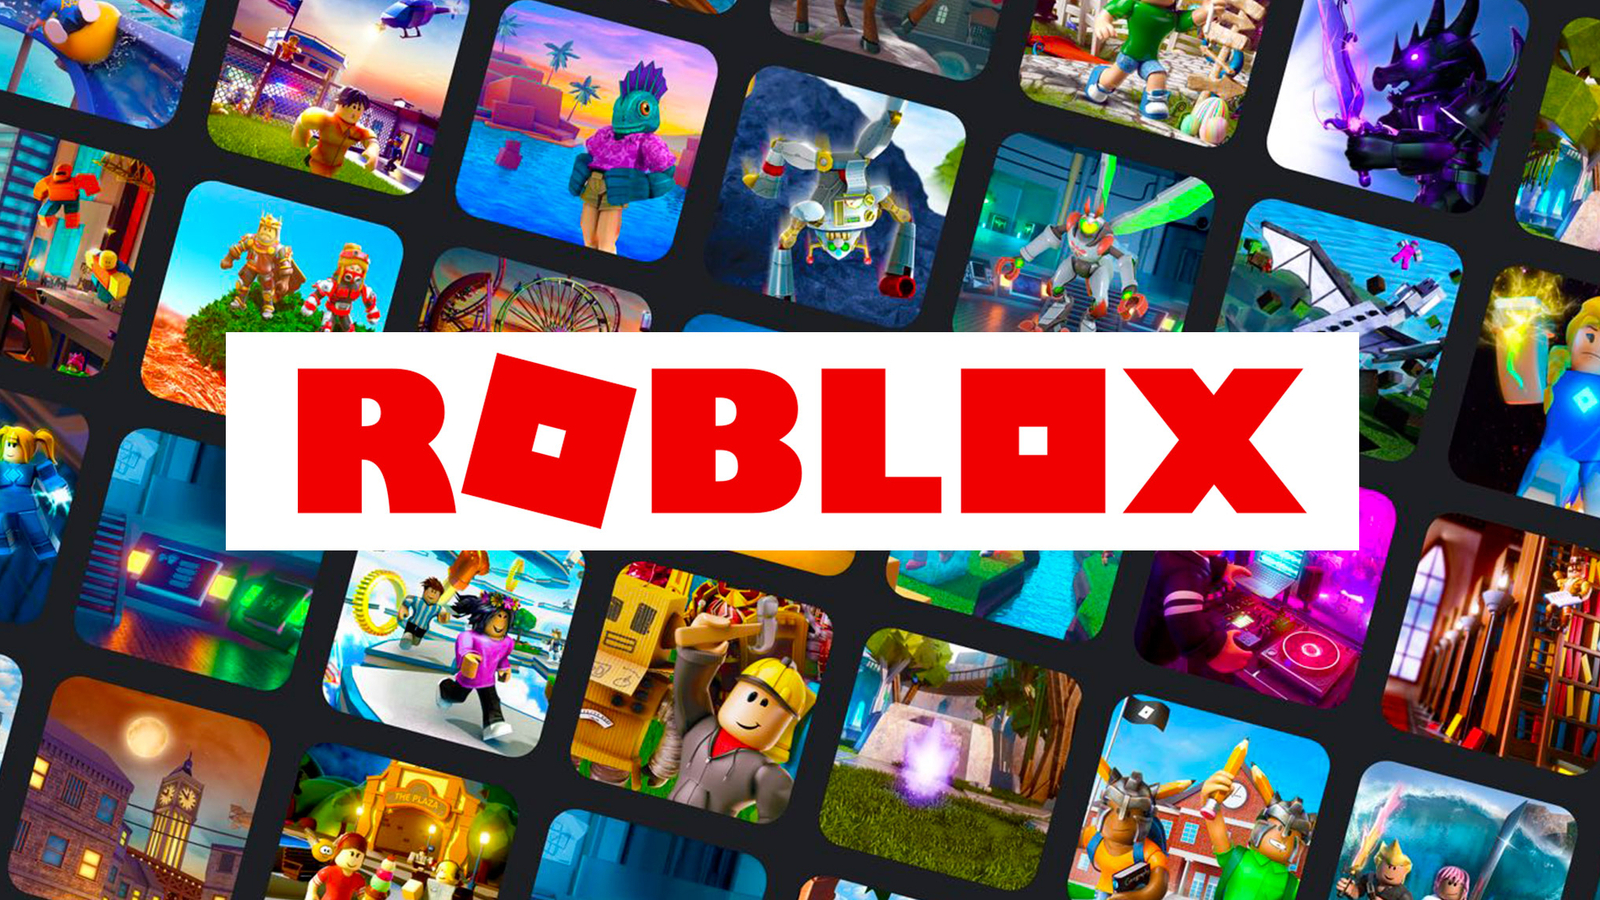 How To Stream Roblox On Discord